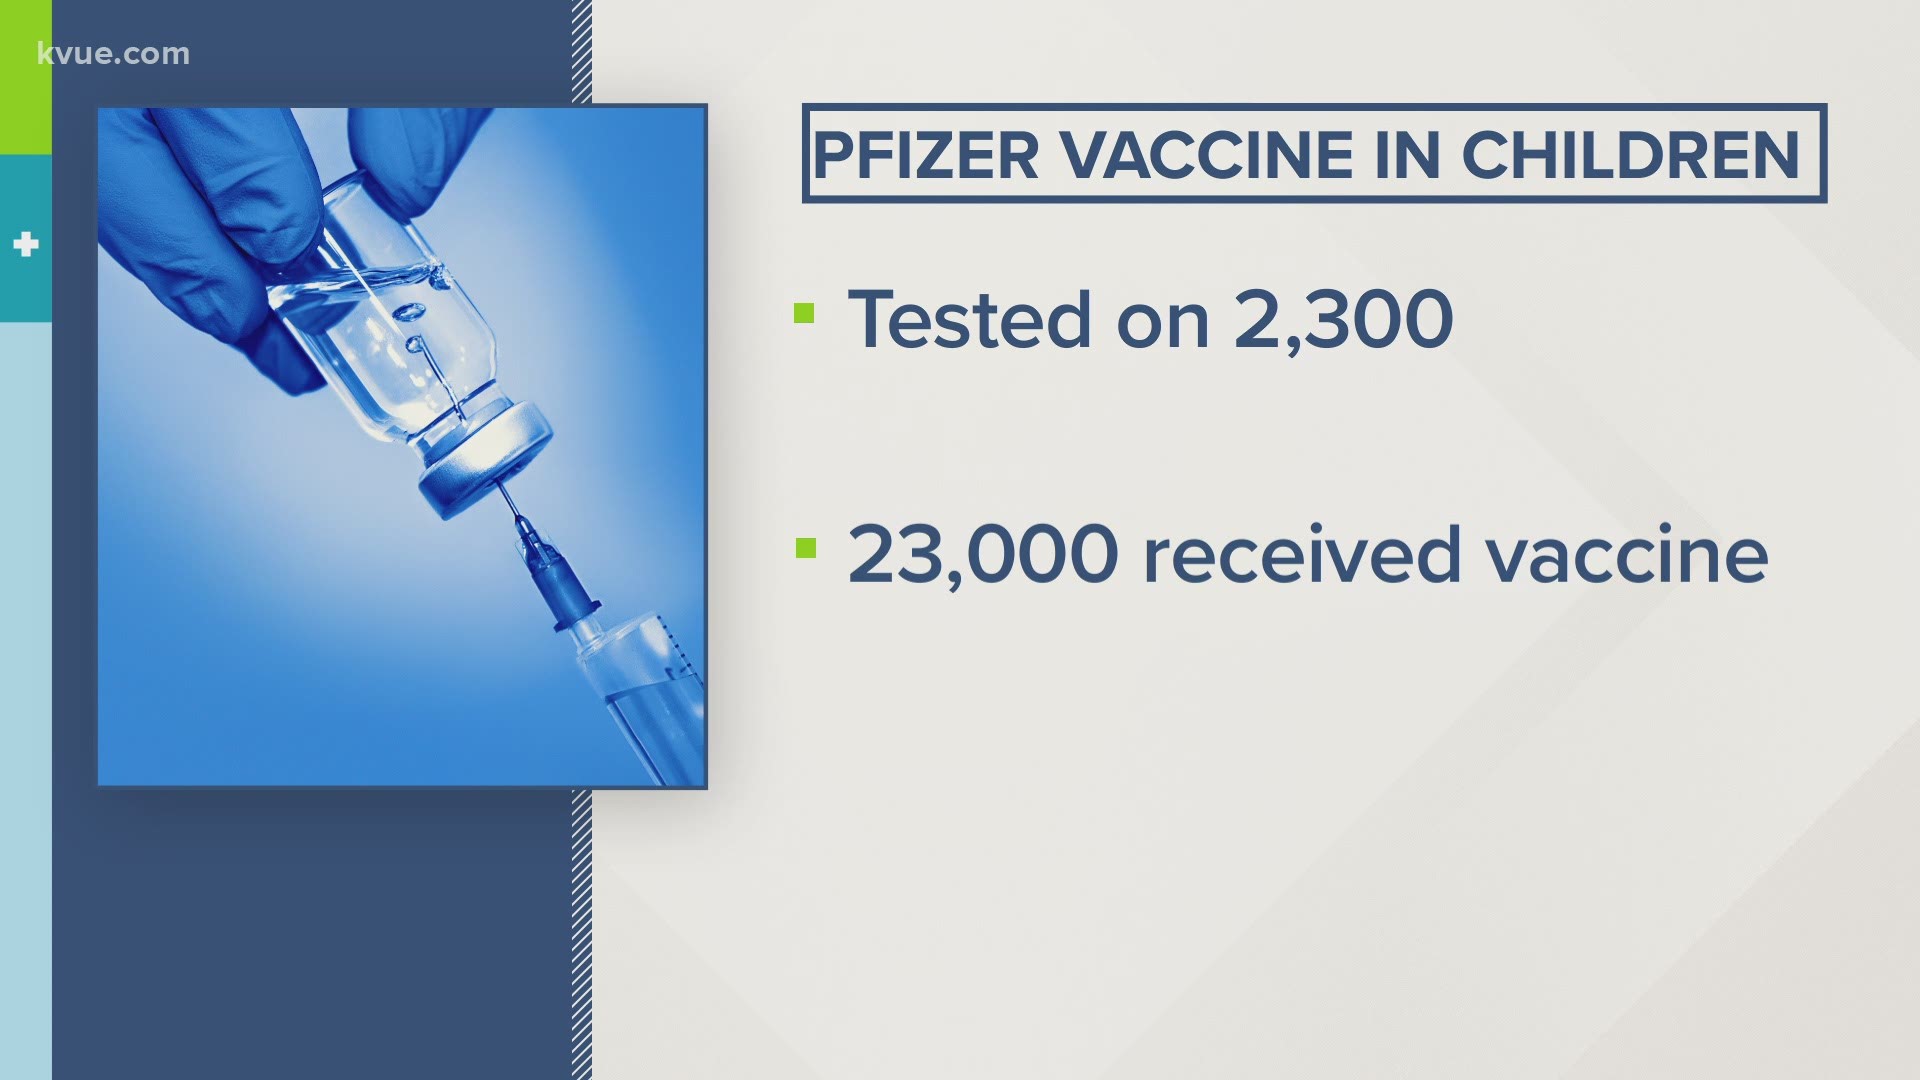 Moderna is joining Pfizer in saying its vaccine is effective in kids 12 years old and older. The company plans to ask the FDA for emergency use authorization.